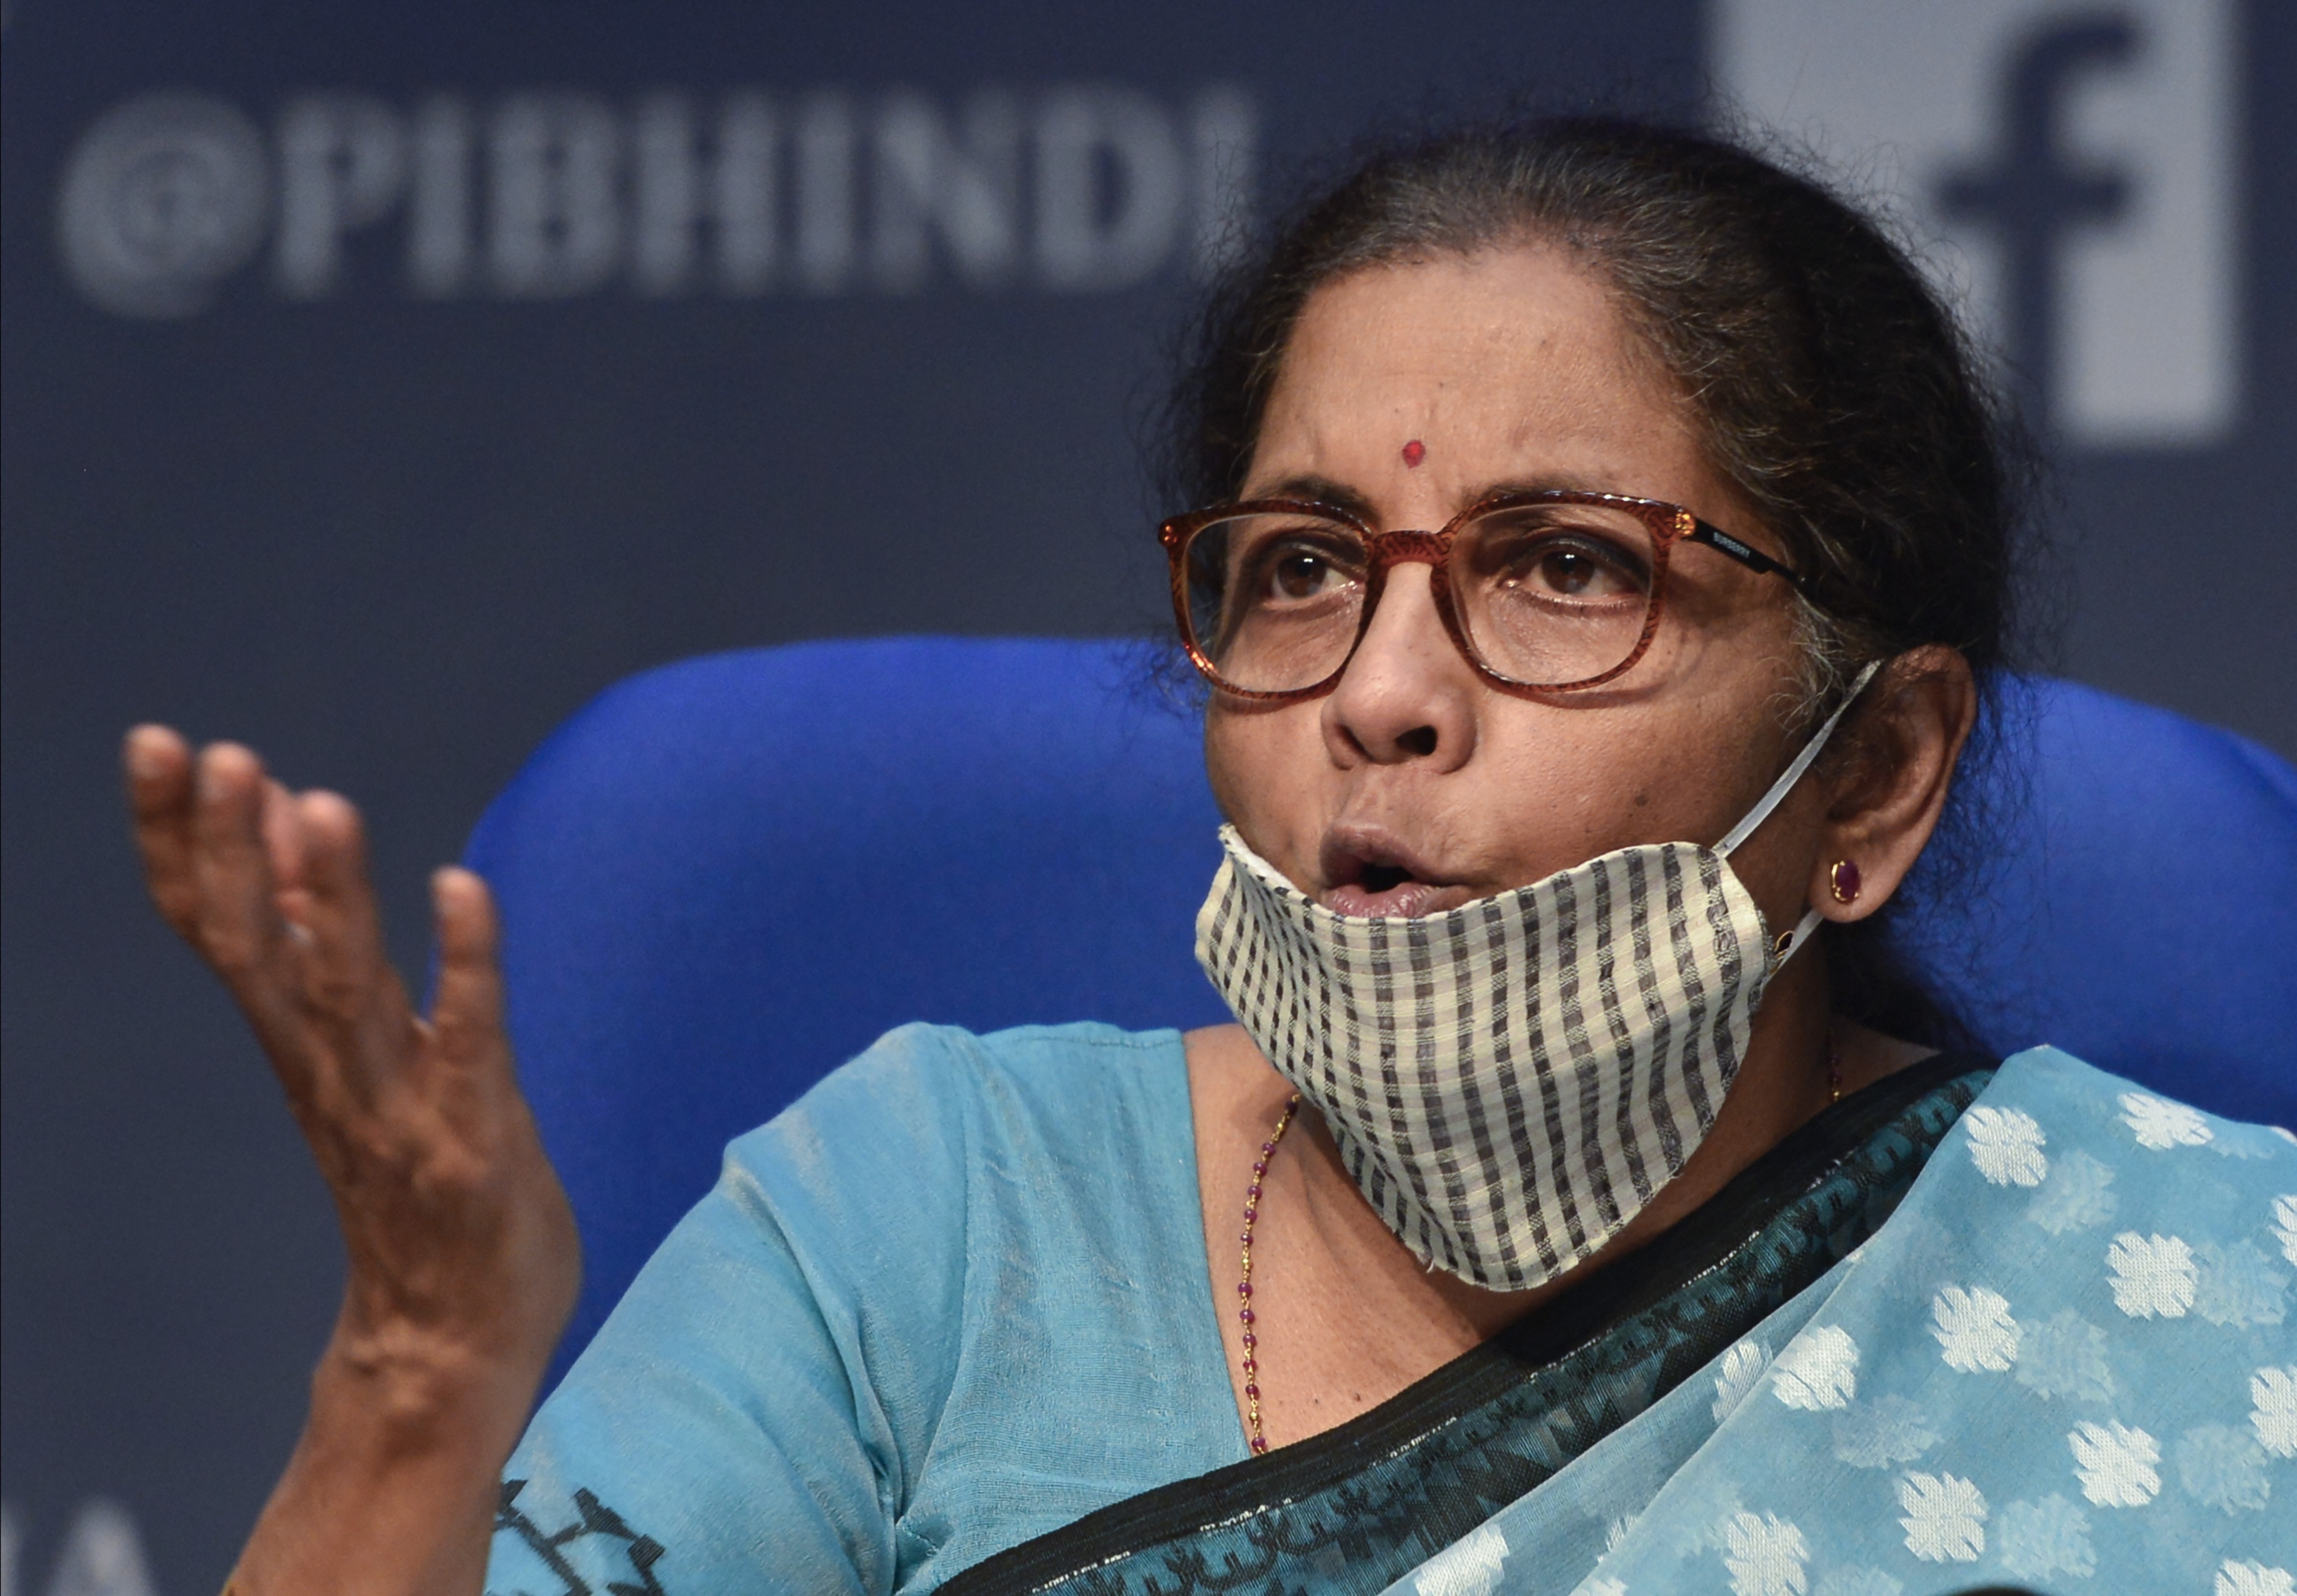 Finance minister Nirmala Sitharaman, who on Wednesday provided details of Prime Minister Narendra Modi’s stimulus package, also announced that there would be no global tenders for government procurement contracts worth up to Rs 200 crore.

